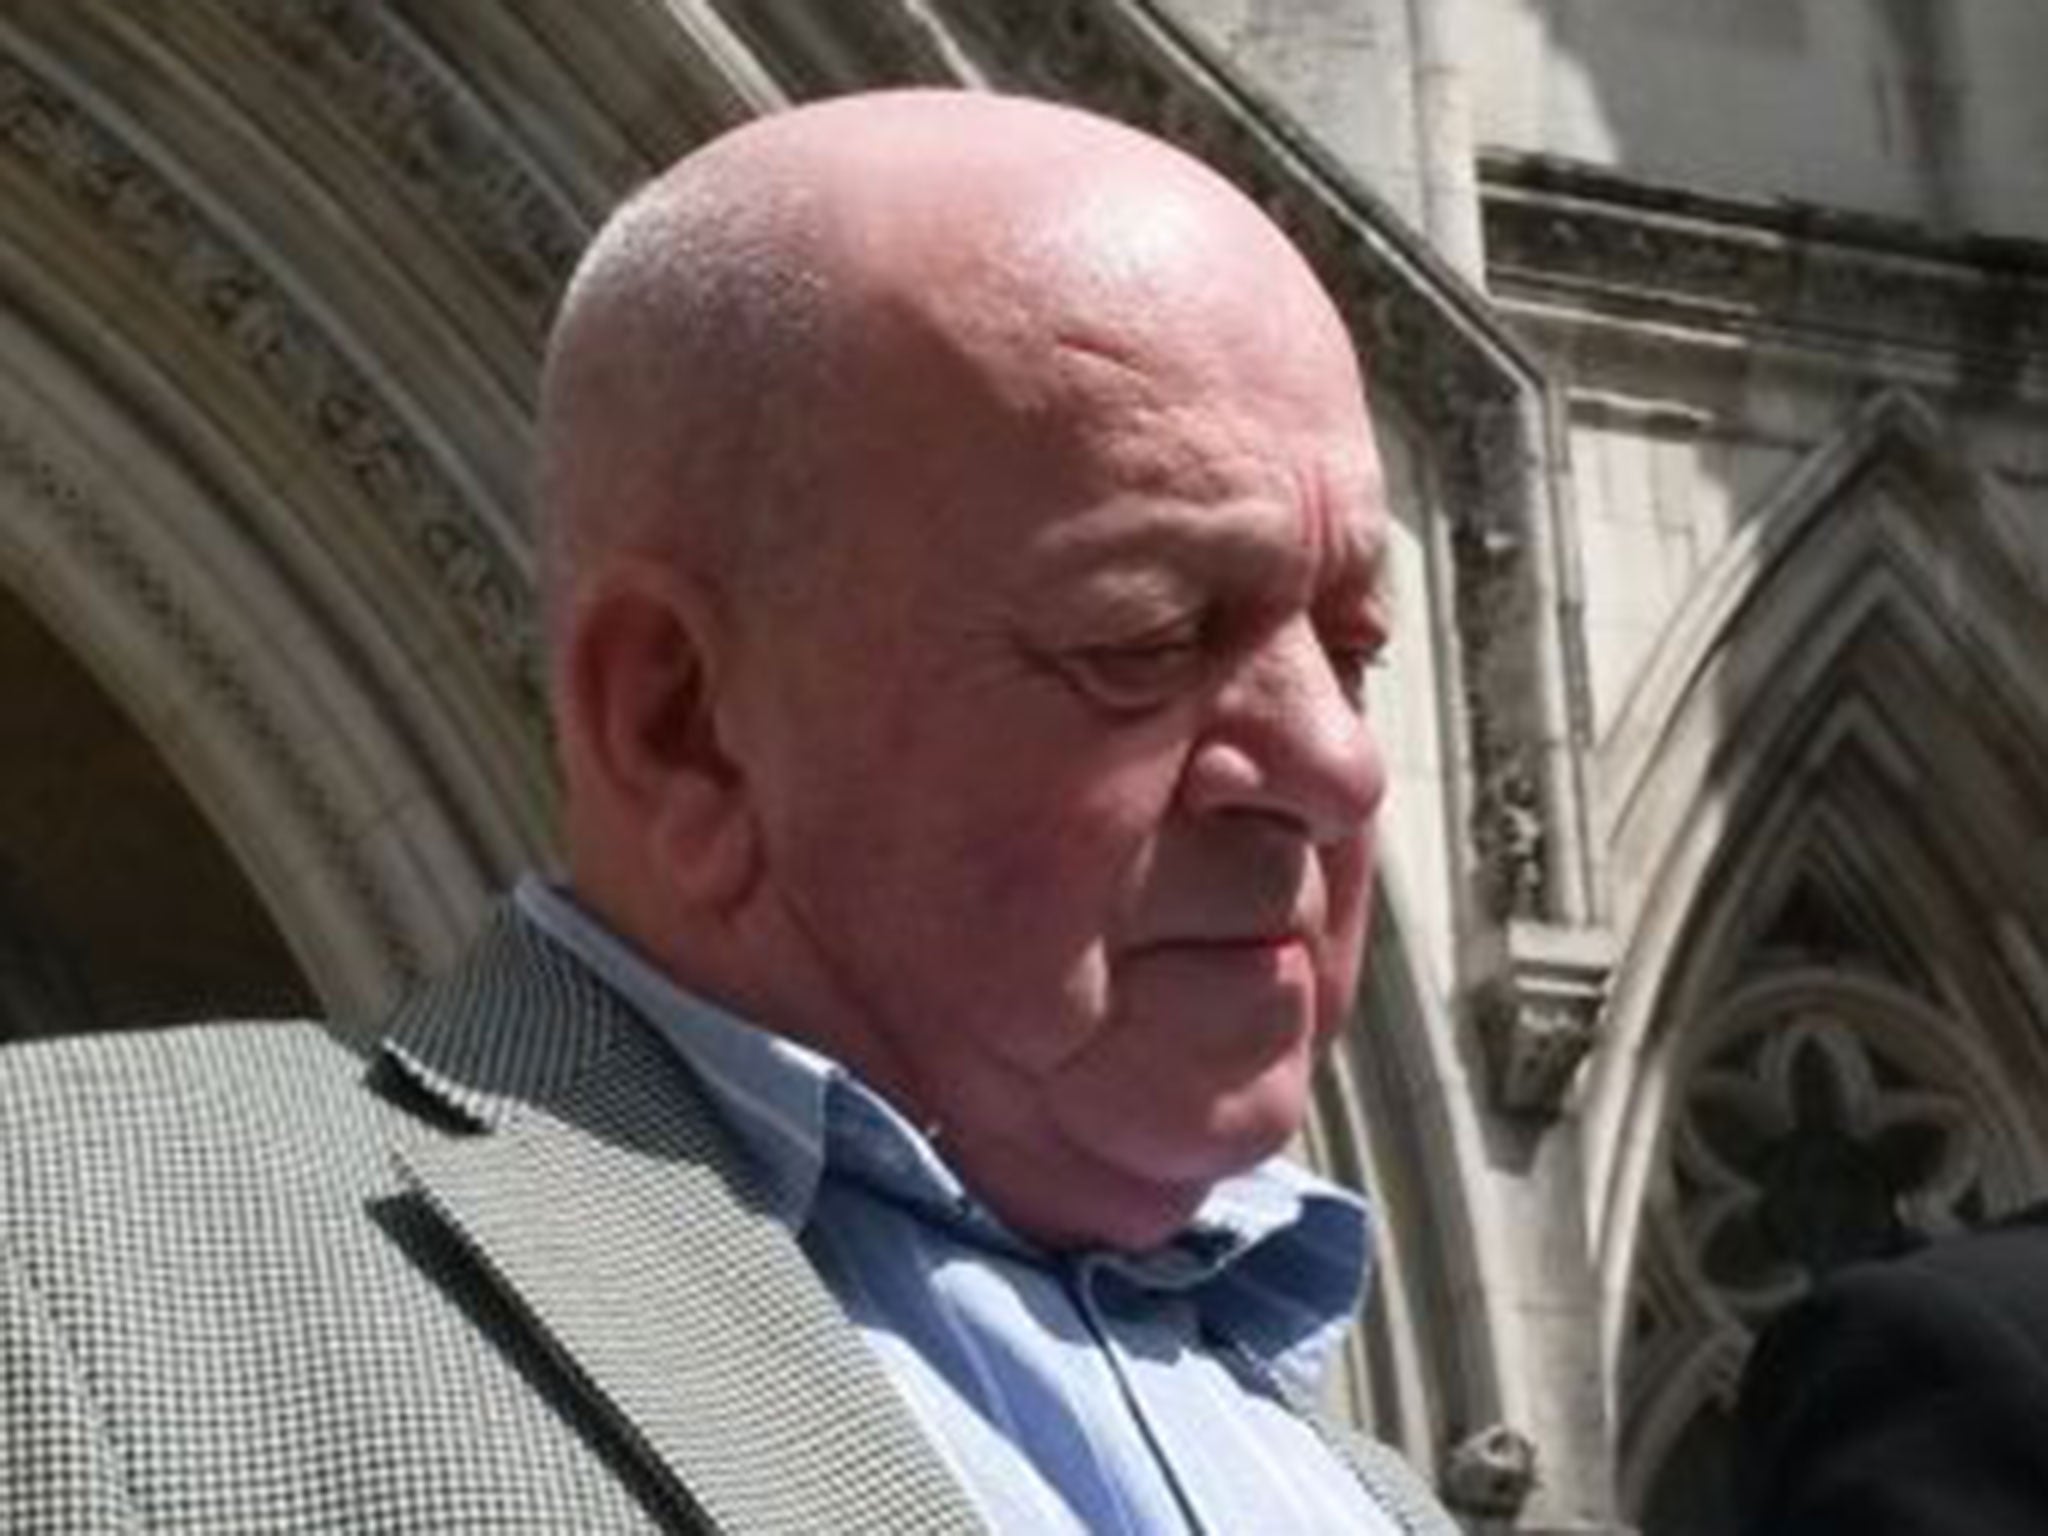 Widower David Tracey stands outside the Court of Appeal in London, after three appeal judges ruled that the human rights of his late wife were violated because she was not consulted before a 'do not resuscitate' order (DNR) was placed on her records